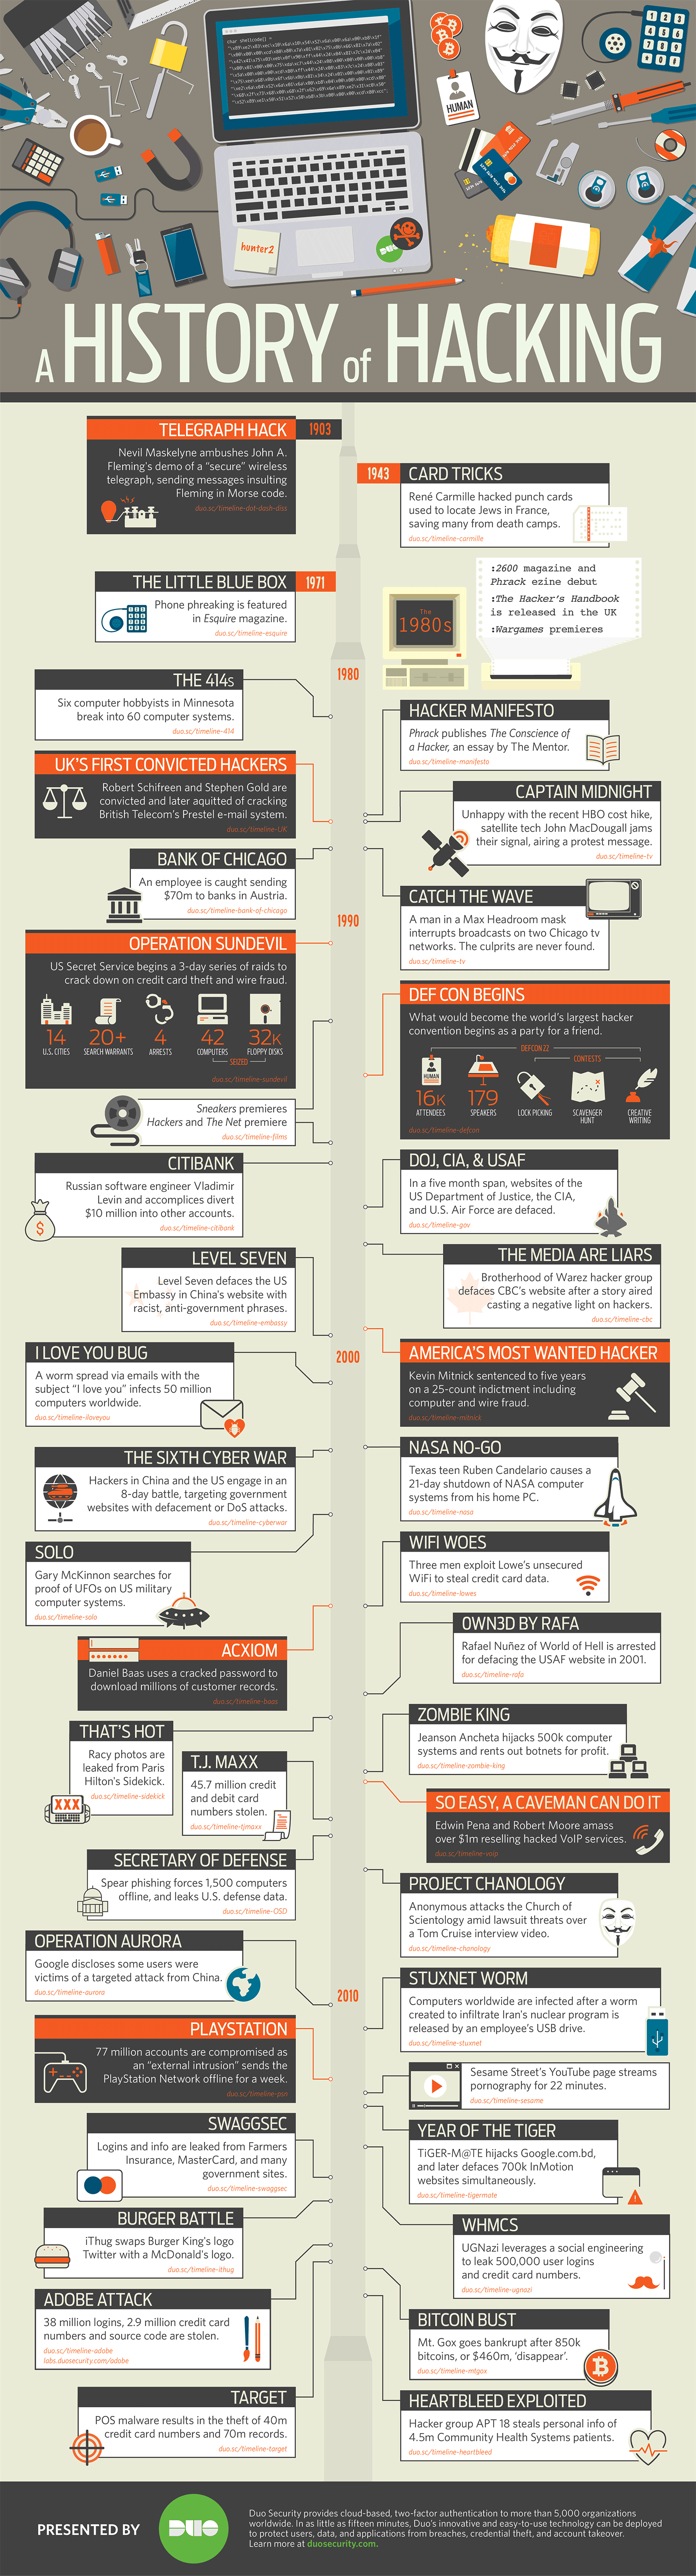 hacking_infographic